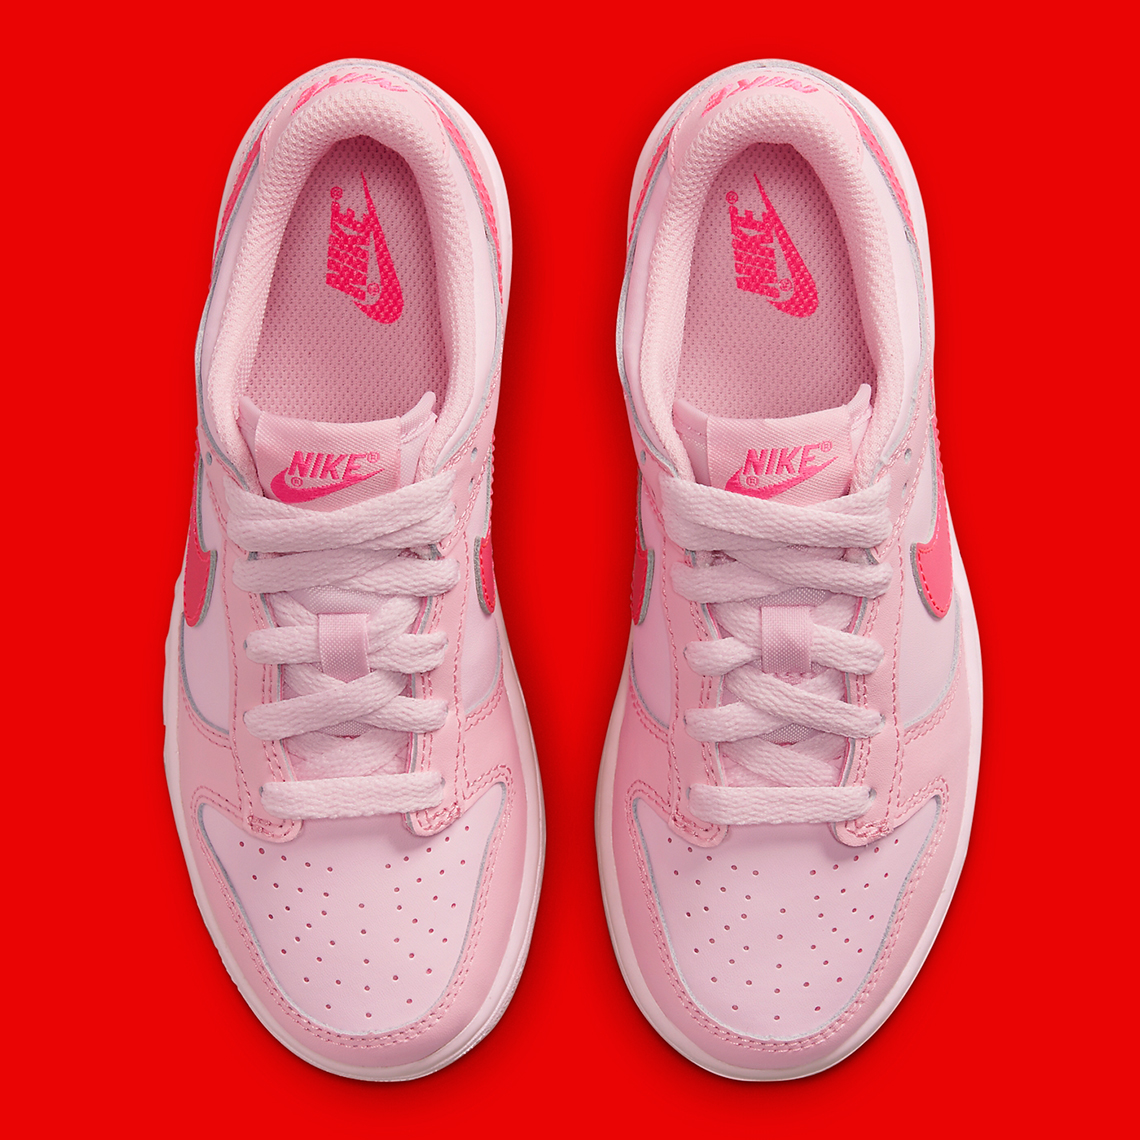 nike dunk low pink red dh9756 600 release date 3